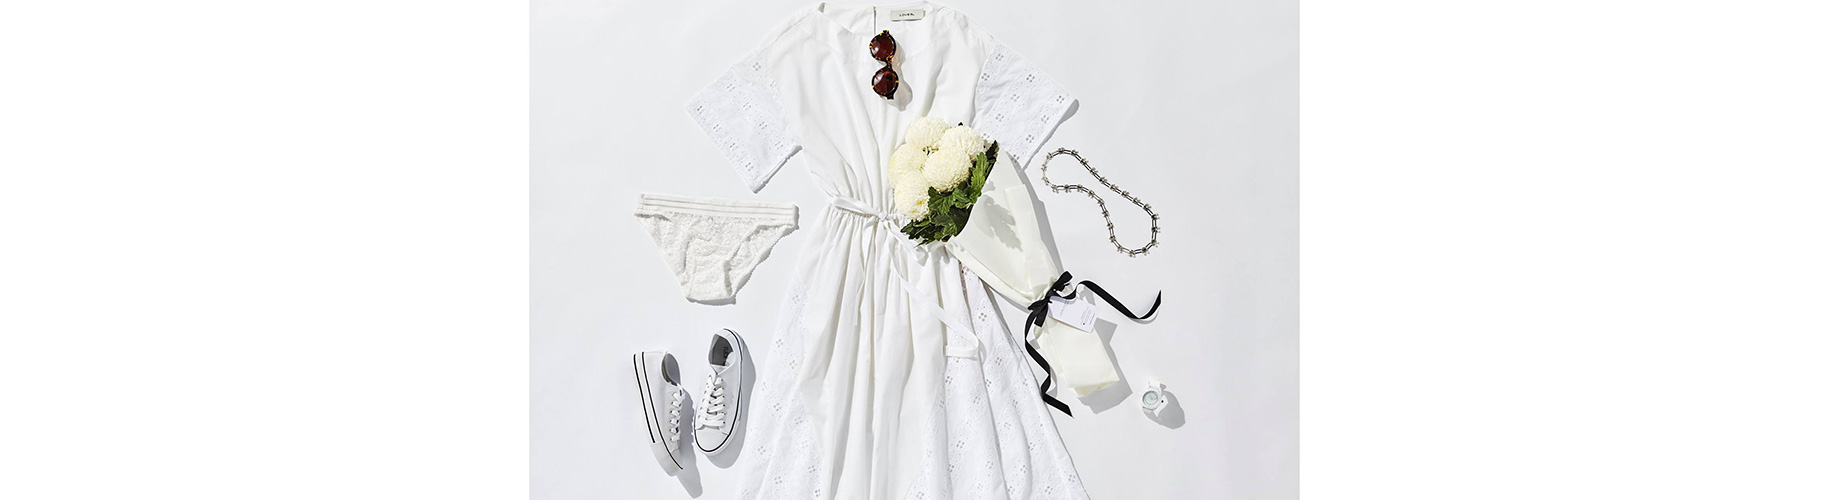 white clothes flat lay photography